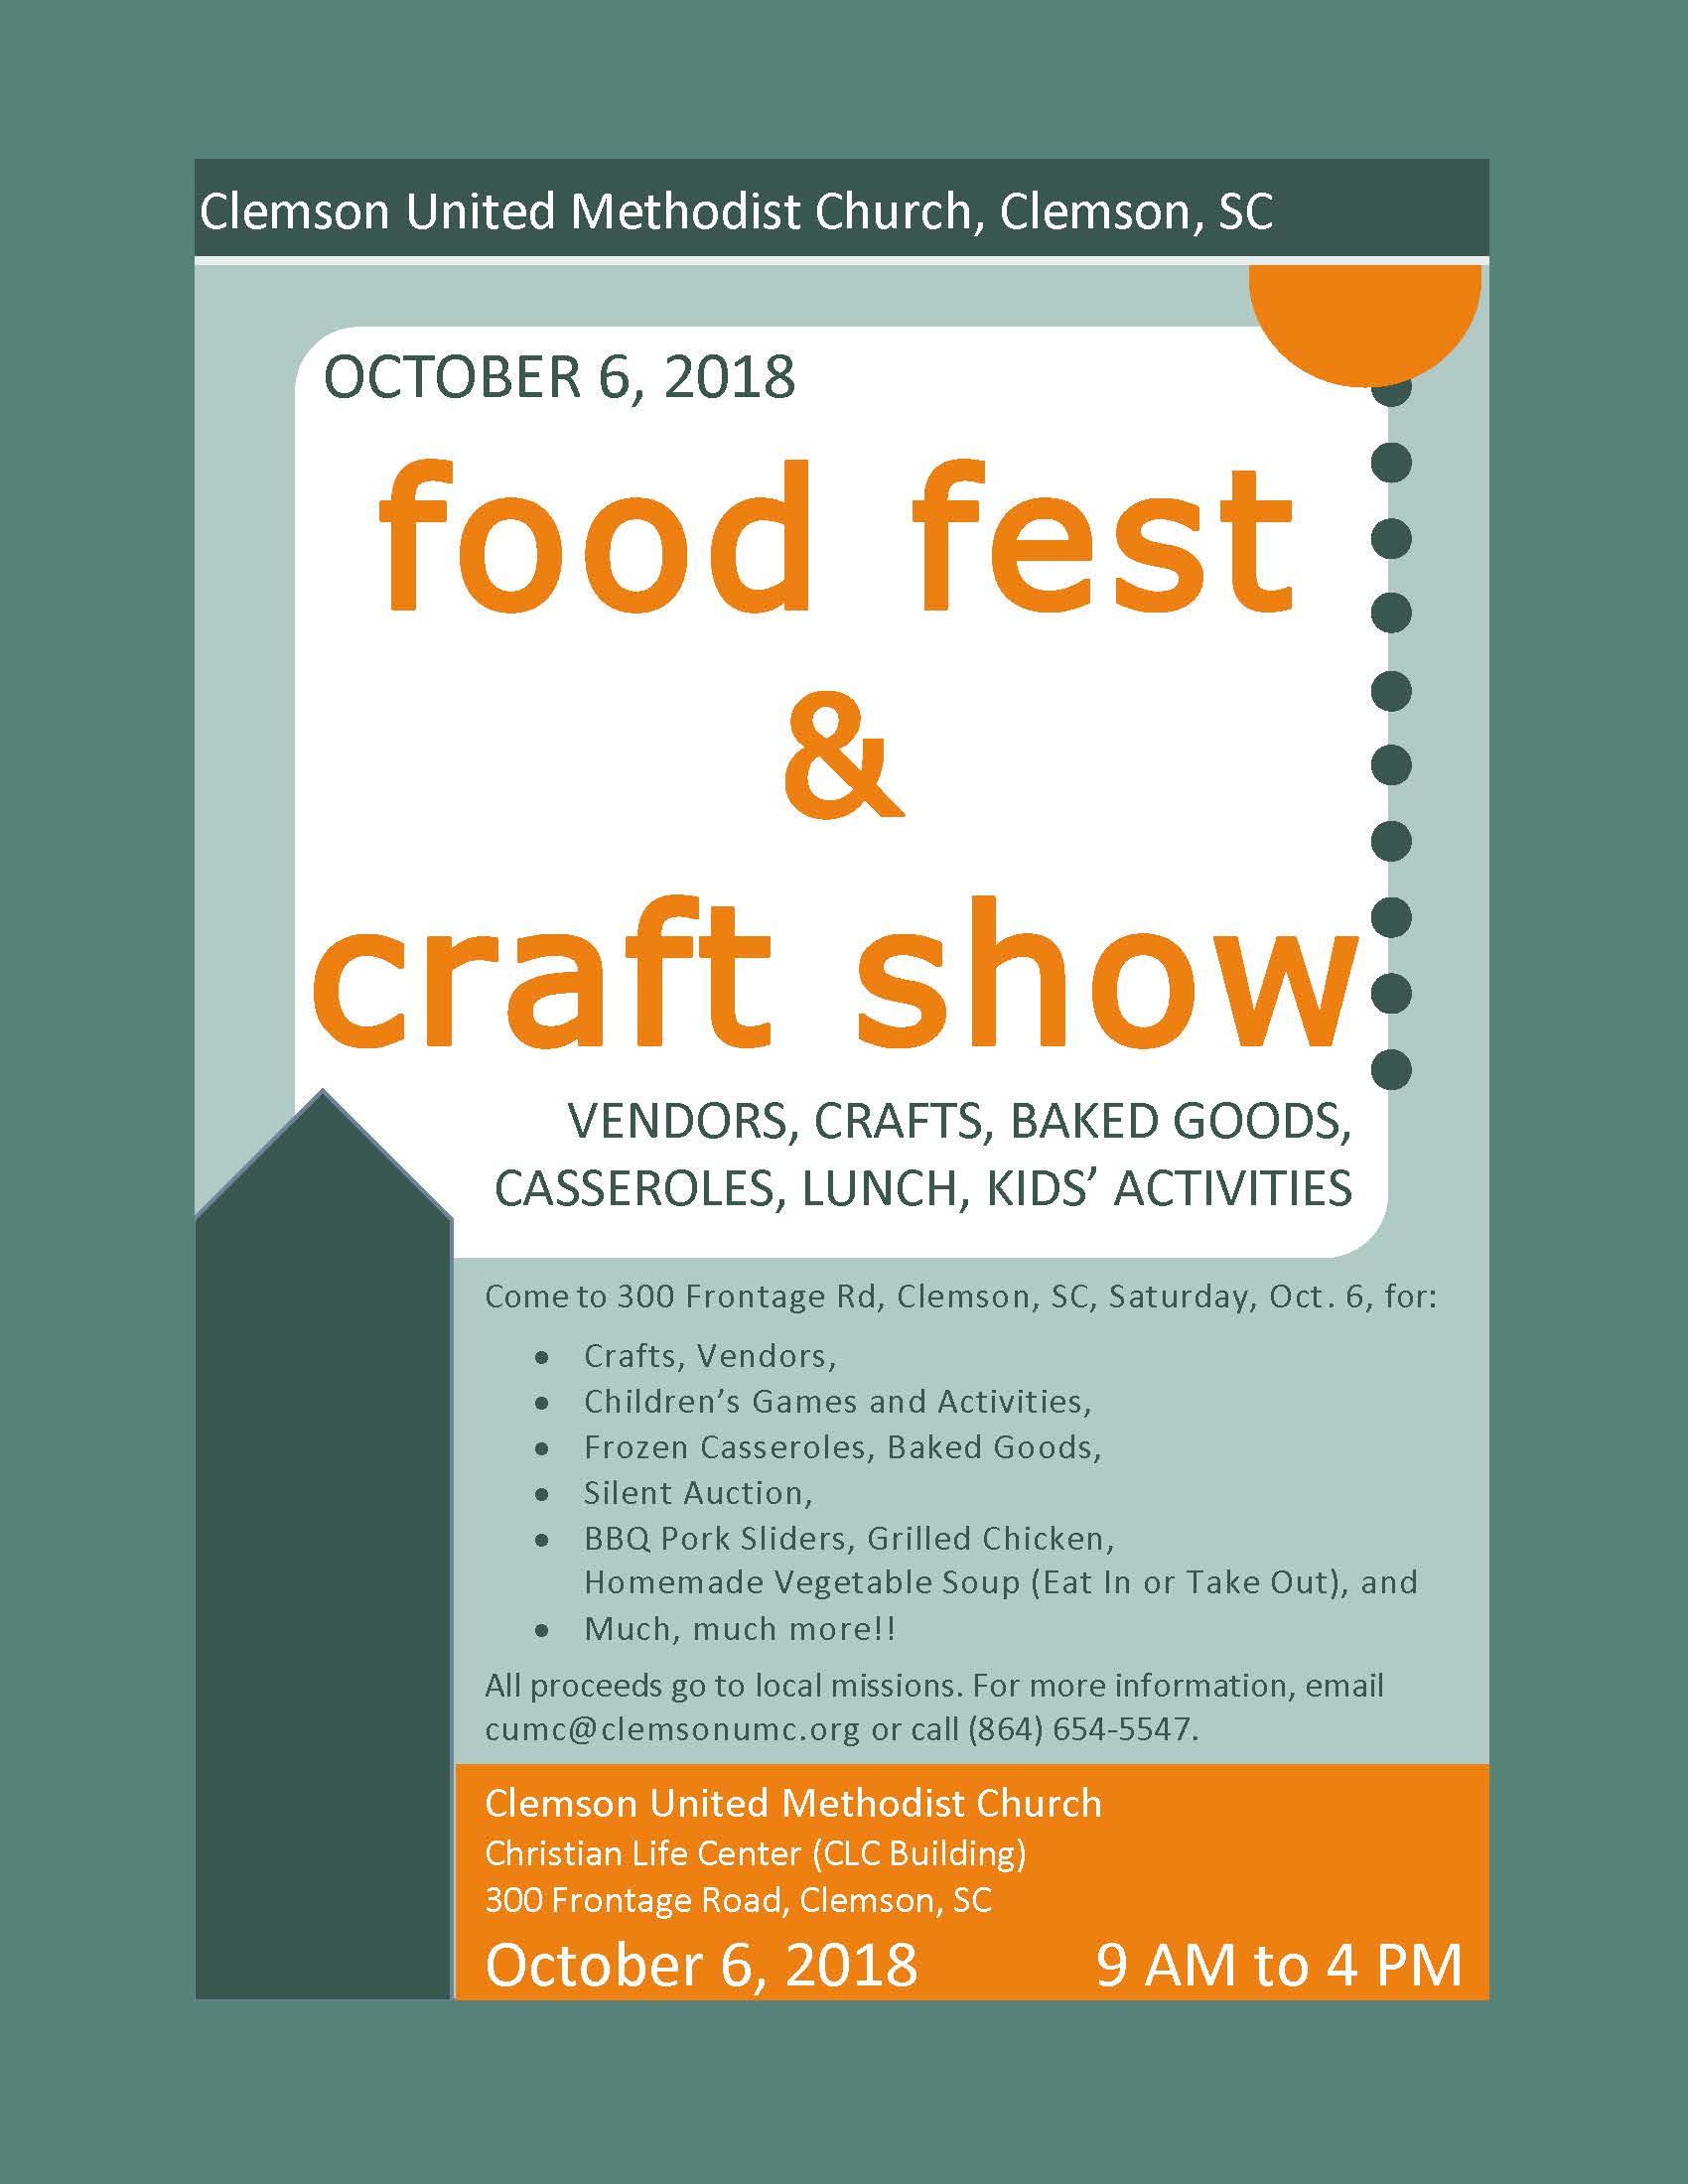 food fest and craft show saturday, october 6th, 9am to 4pm at Clemson United Methodist